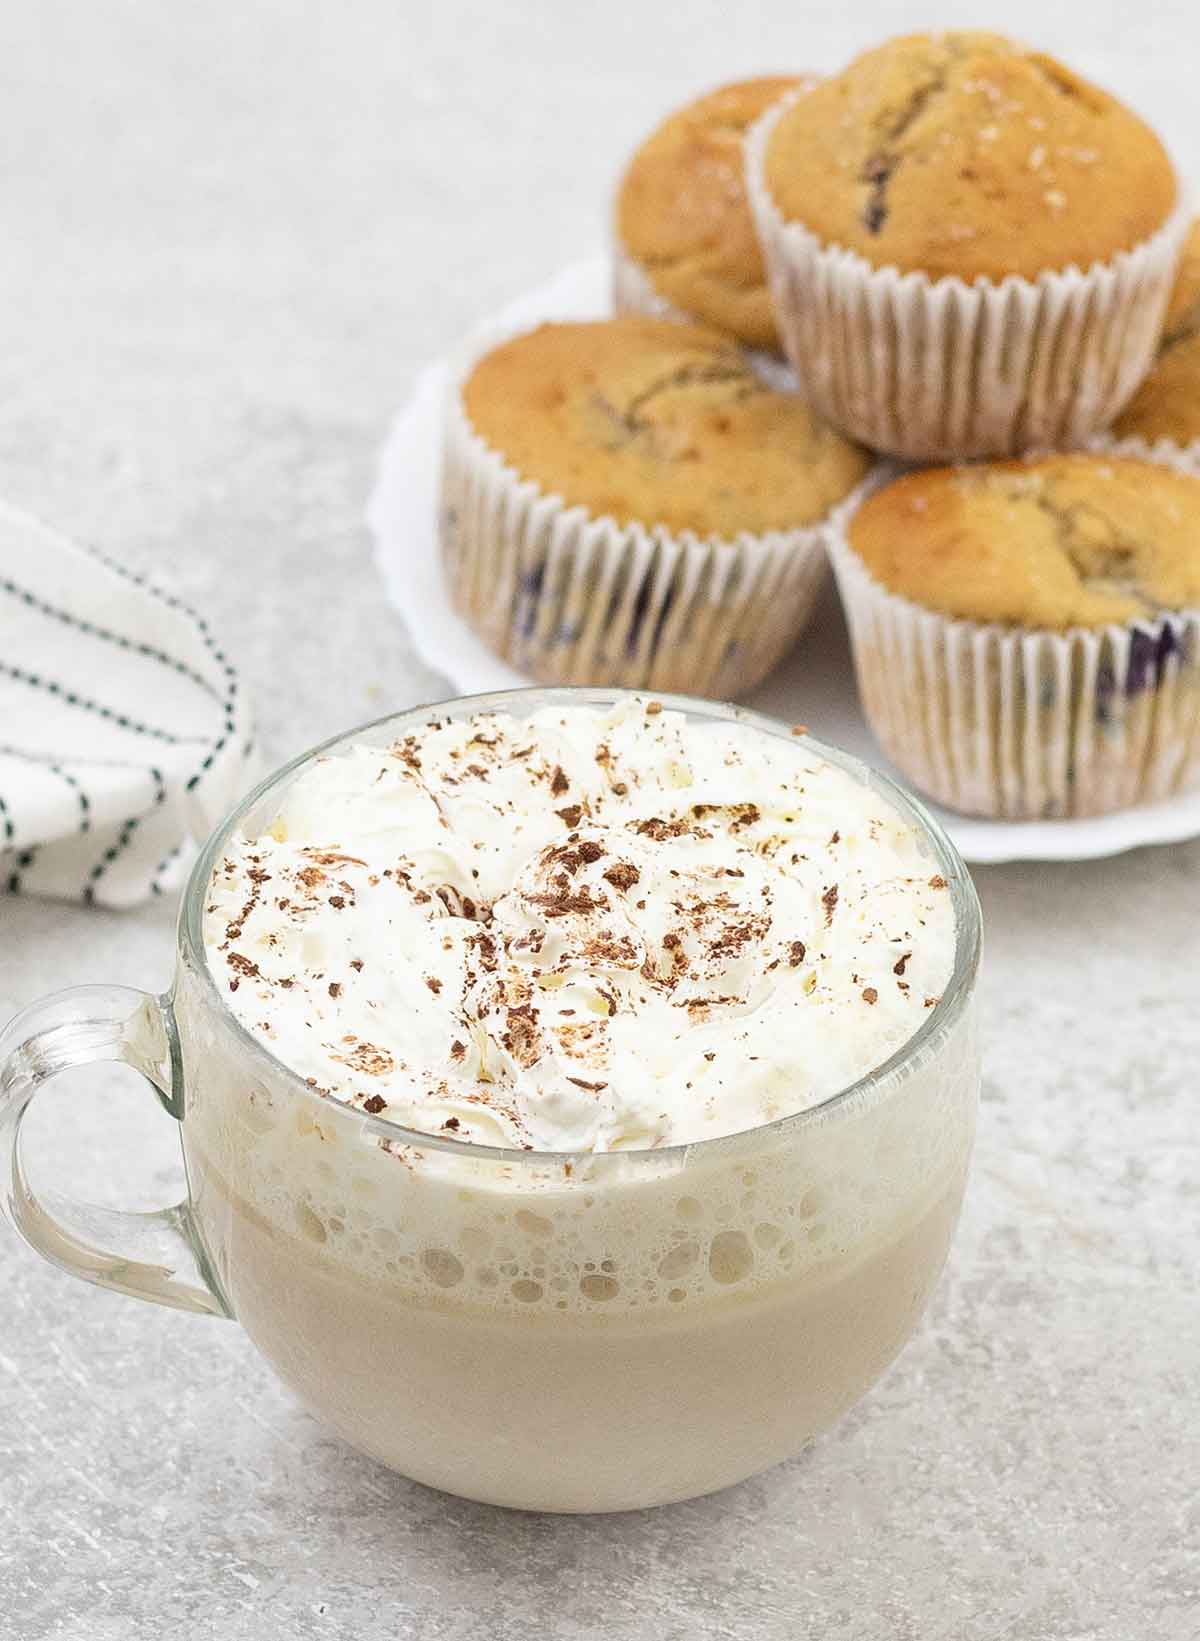 white chocolate latte cup and some muffins in the background.